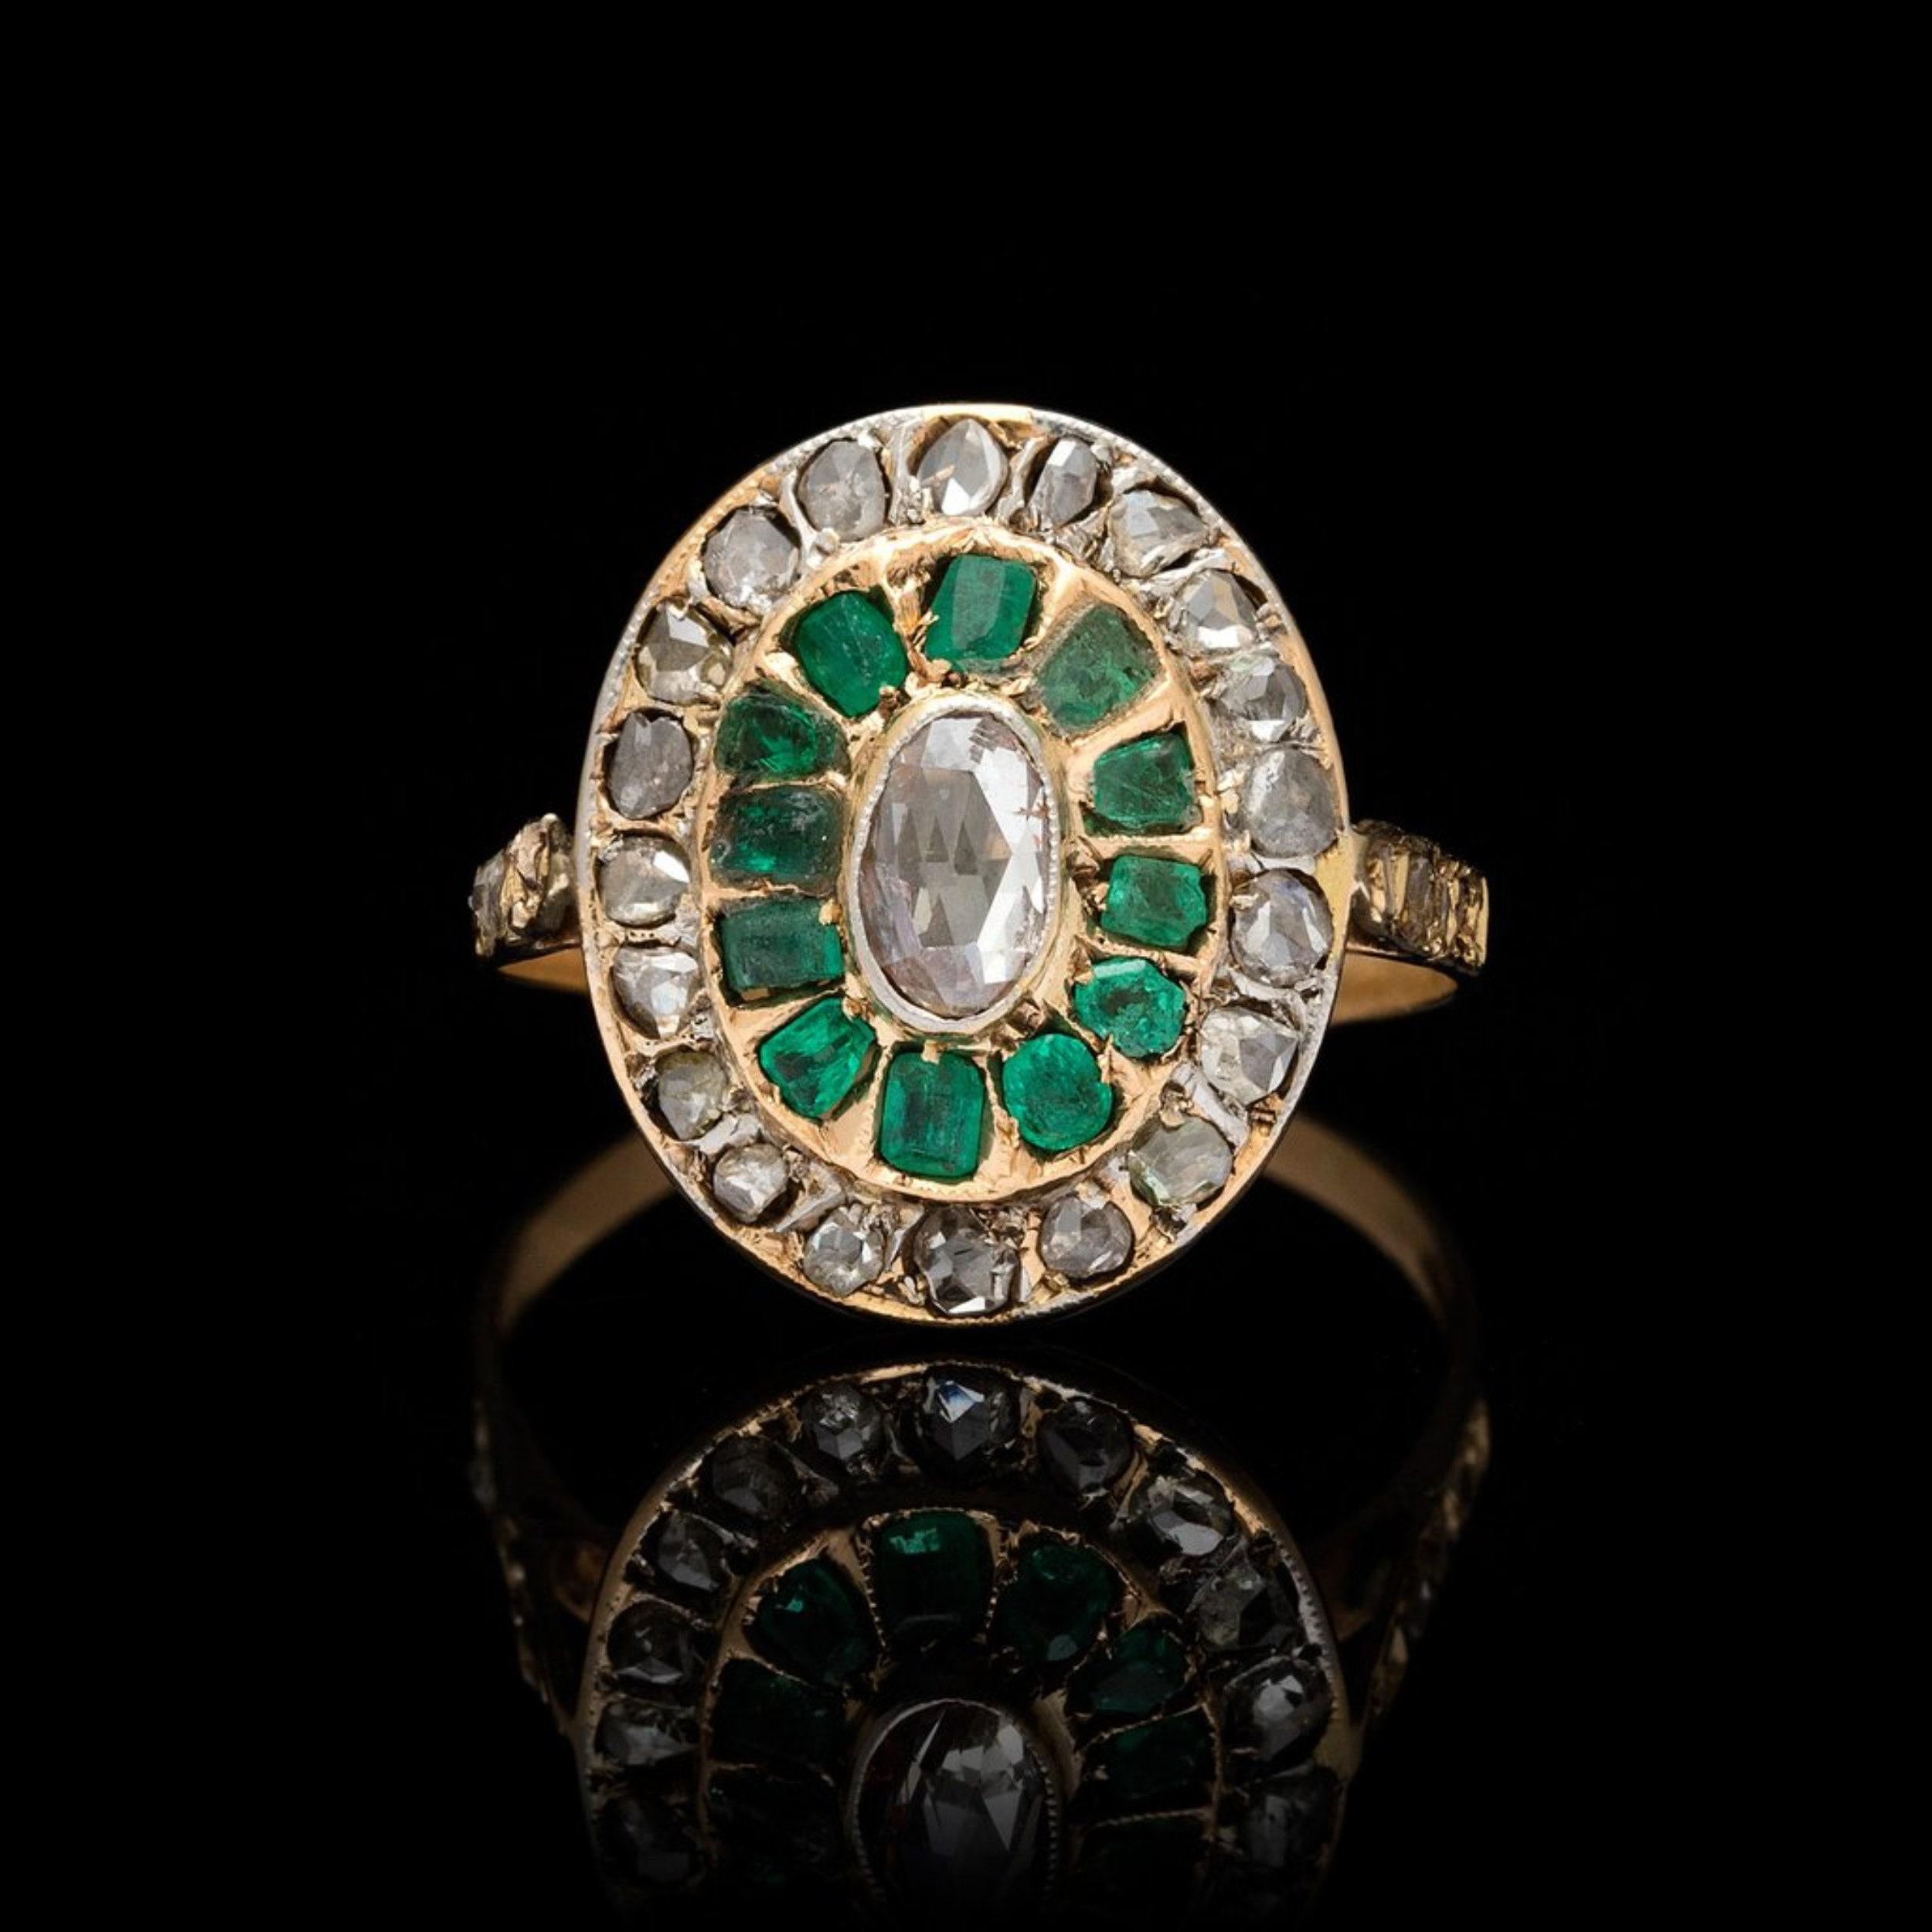 For Sale:  Vintage Style 3.05 Natural Diamond Emerald Fashion Ring in 18K Yellow Gold 4